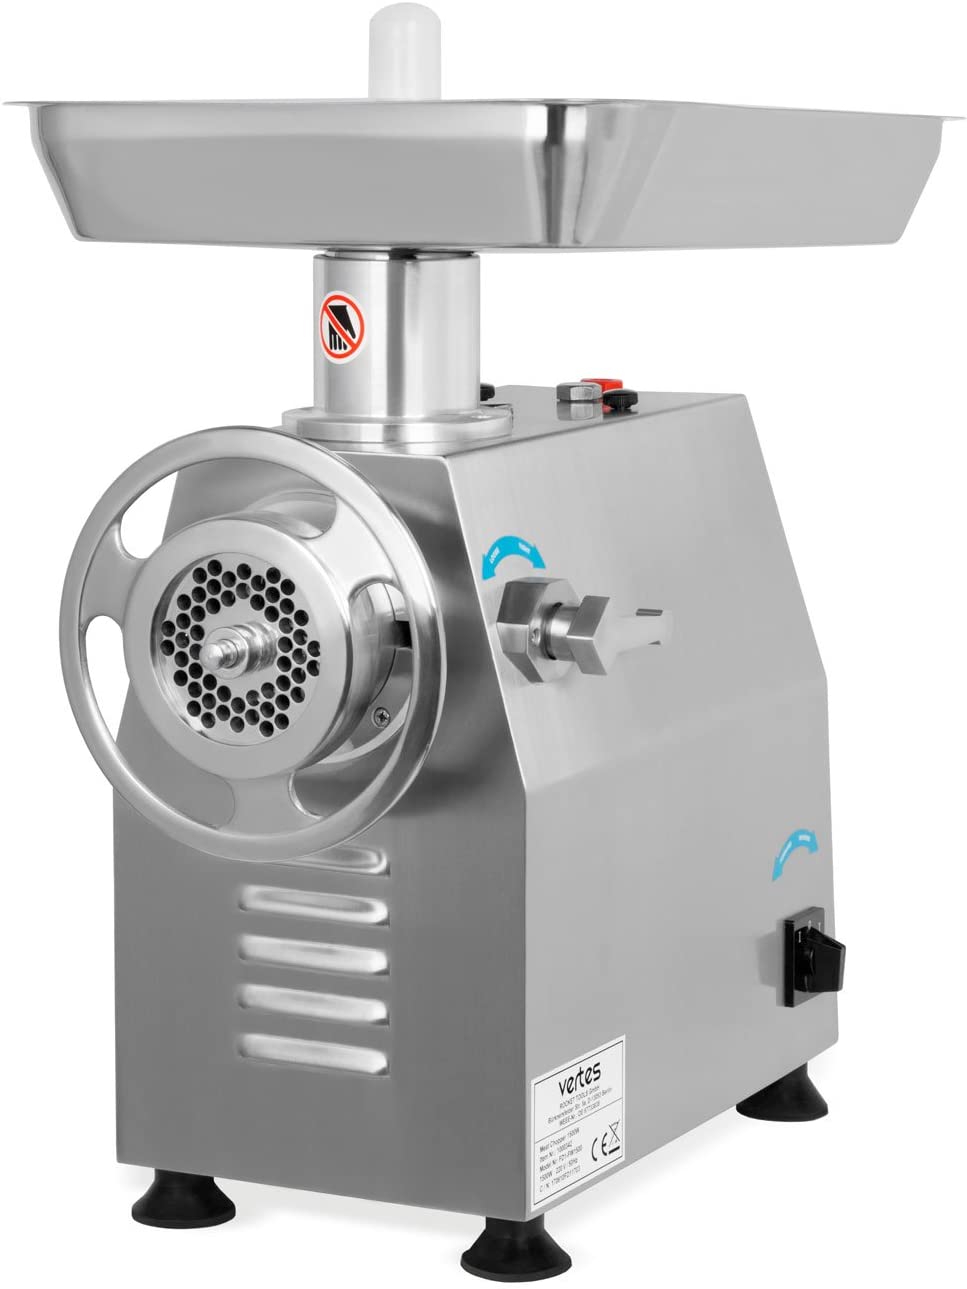 vertes 1500W Stainless Steel Electric Meat Mincer (320kg/Hour, Forward and Reverse Gear, Large Flow Rate, 4 Rubber Feet, Filling Plug)